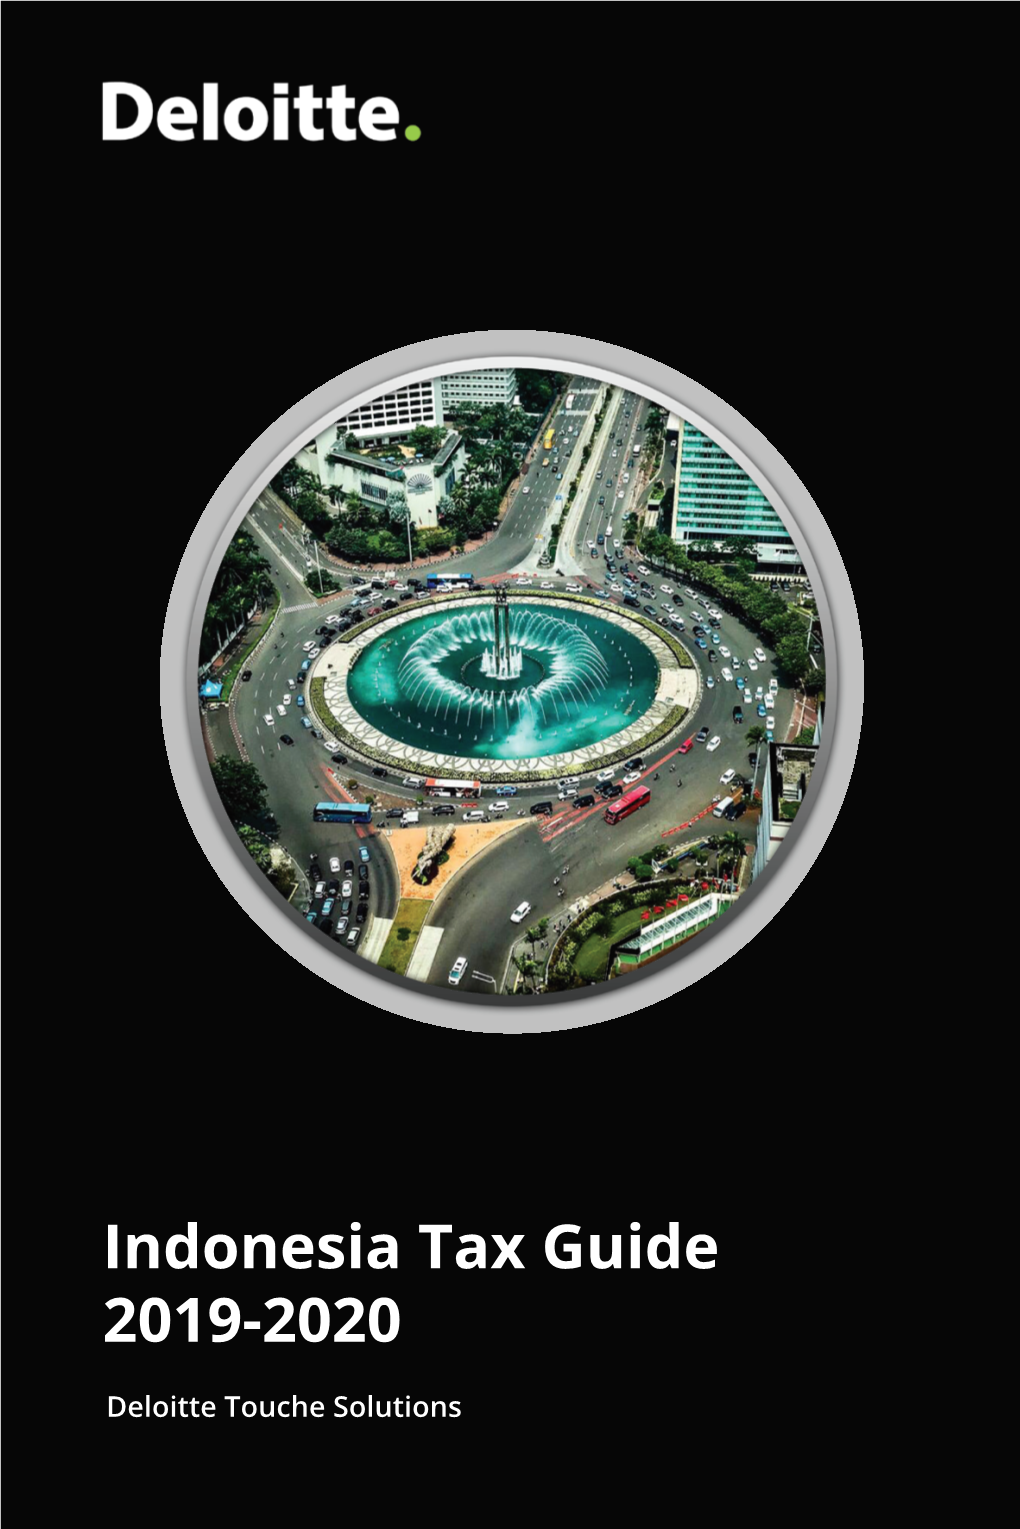 Indonesia Tax Guide 2019-2020